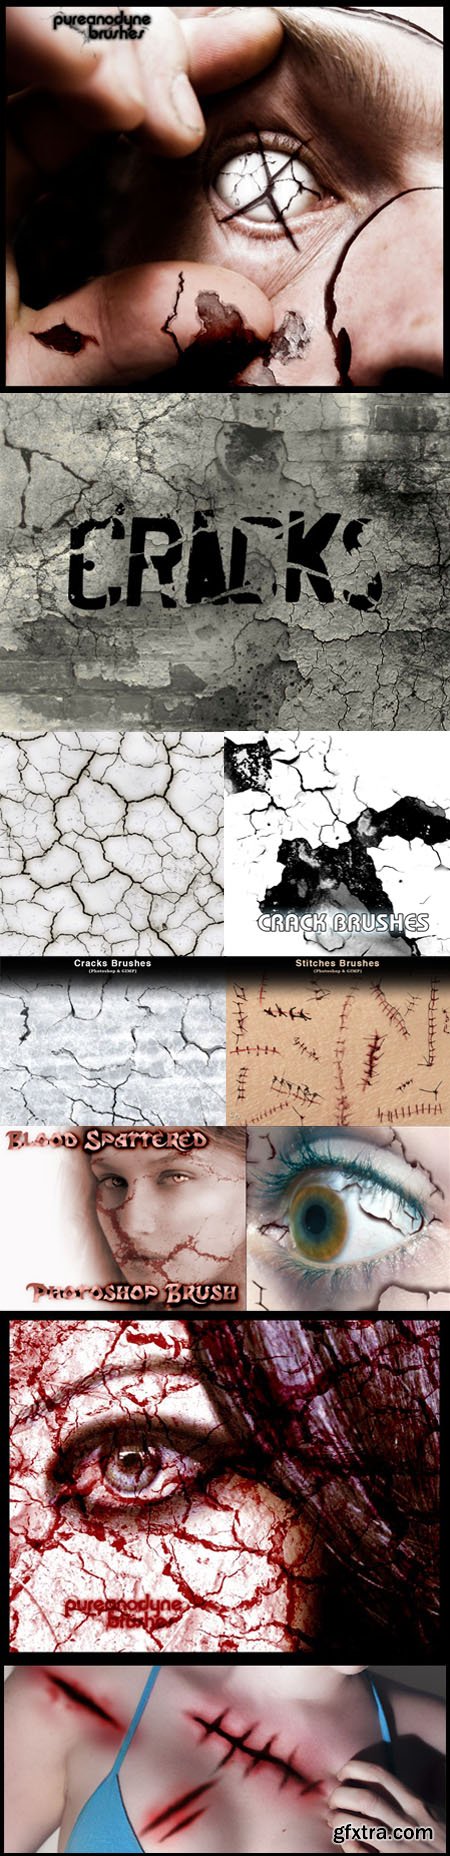 Cracks, Decay, Stitches and Sutures Brushes for Photoshop